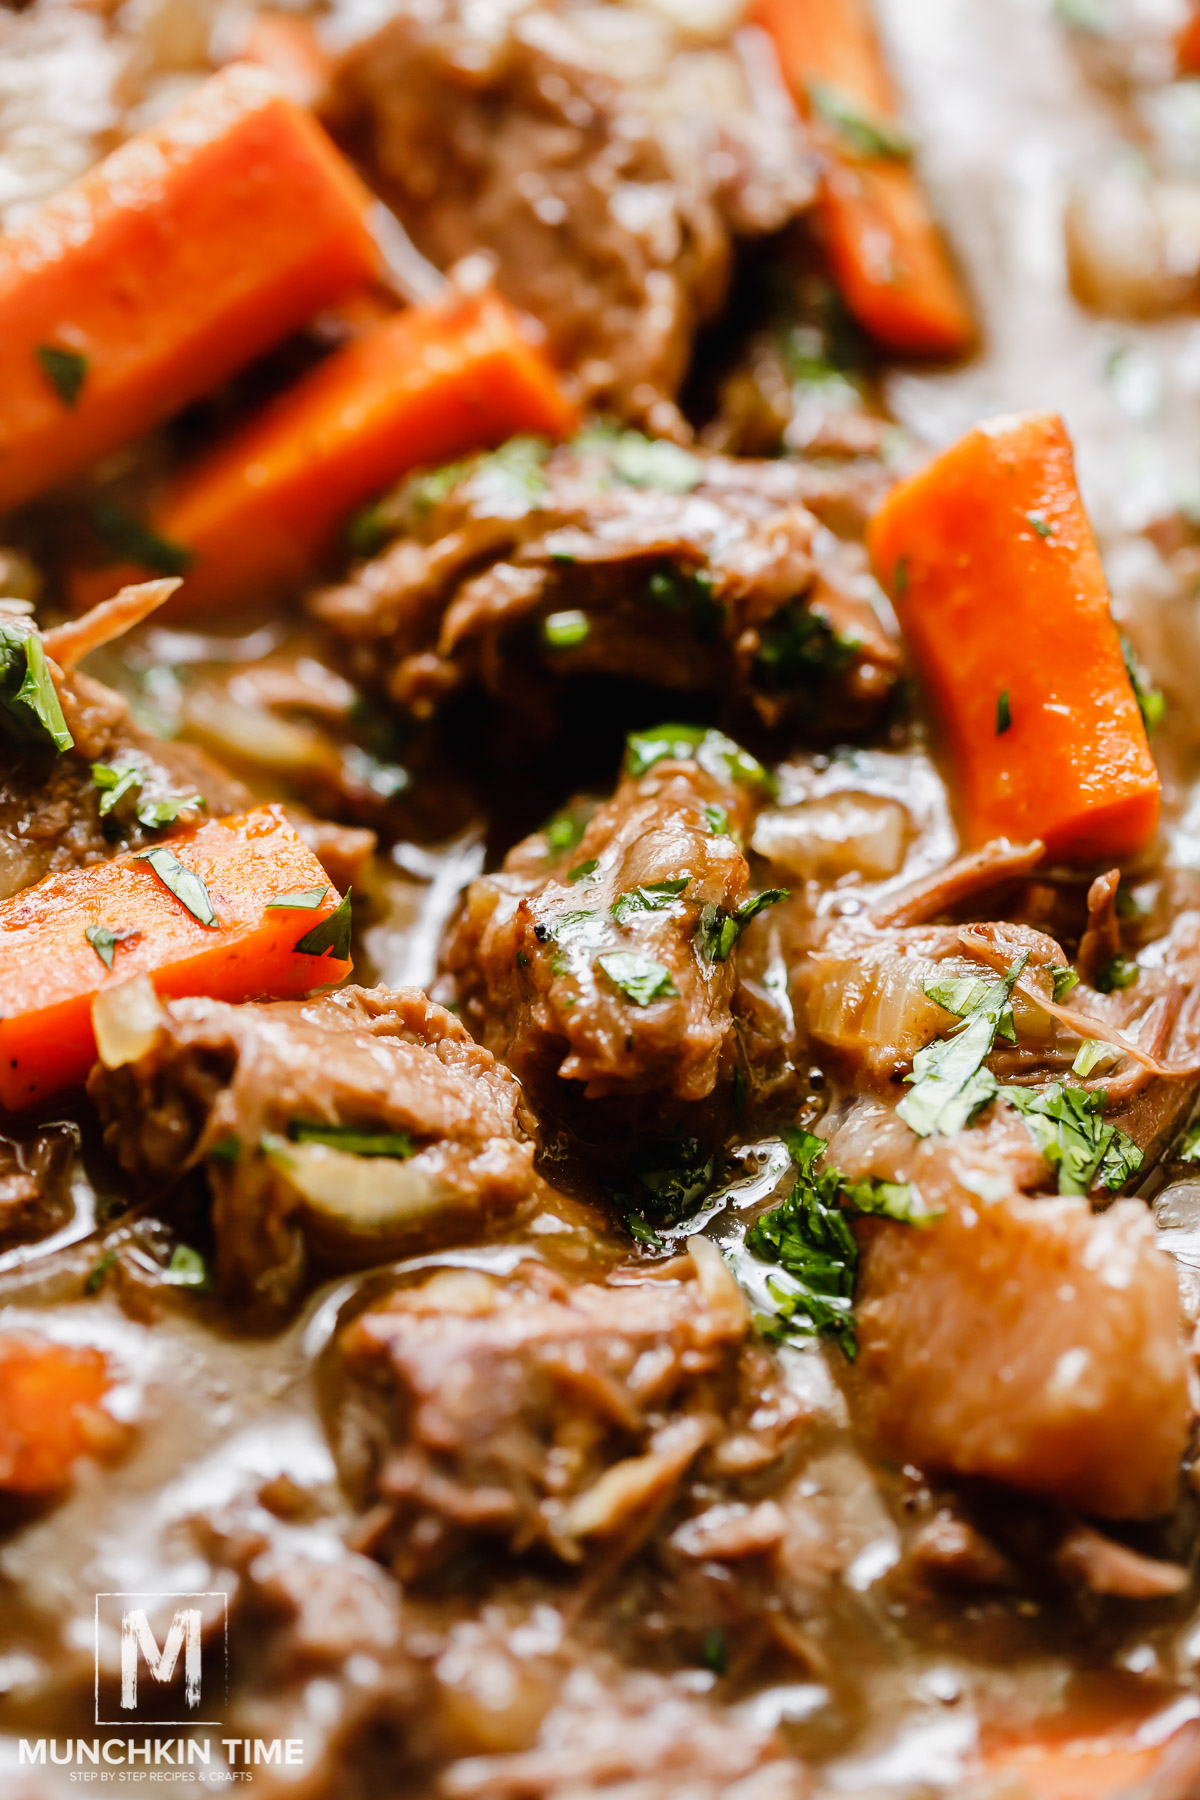 How to make best pot roast recipe? Bring Beef Pot Roast to a boil, garnish with greens like parsley, green onion or cilantro. Enjoy with cooked buckwheat.